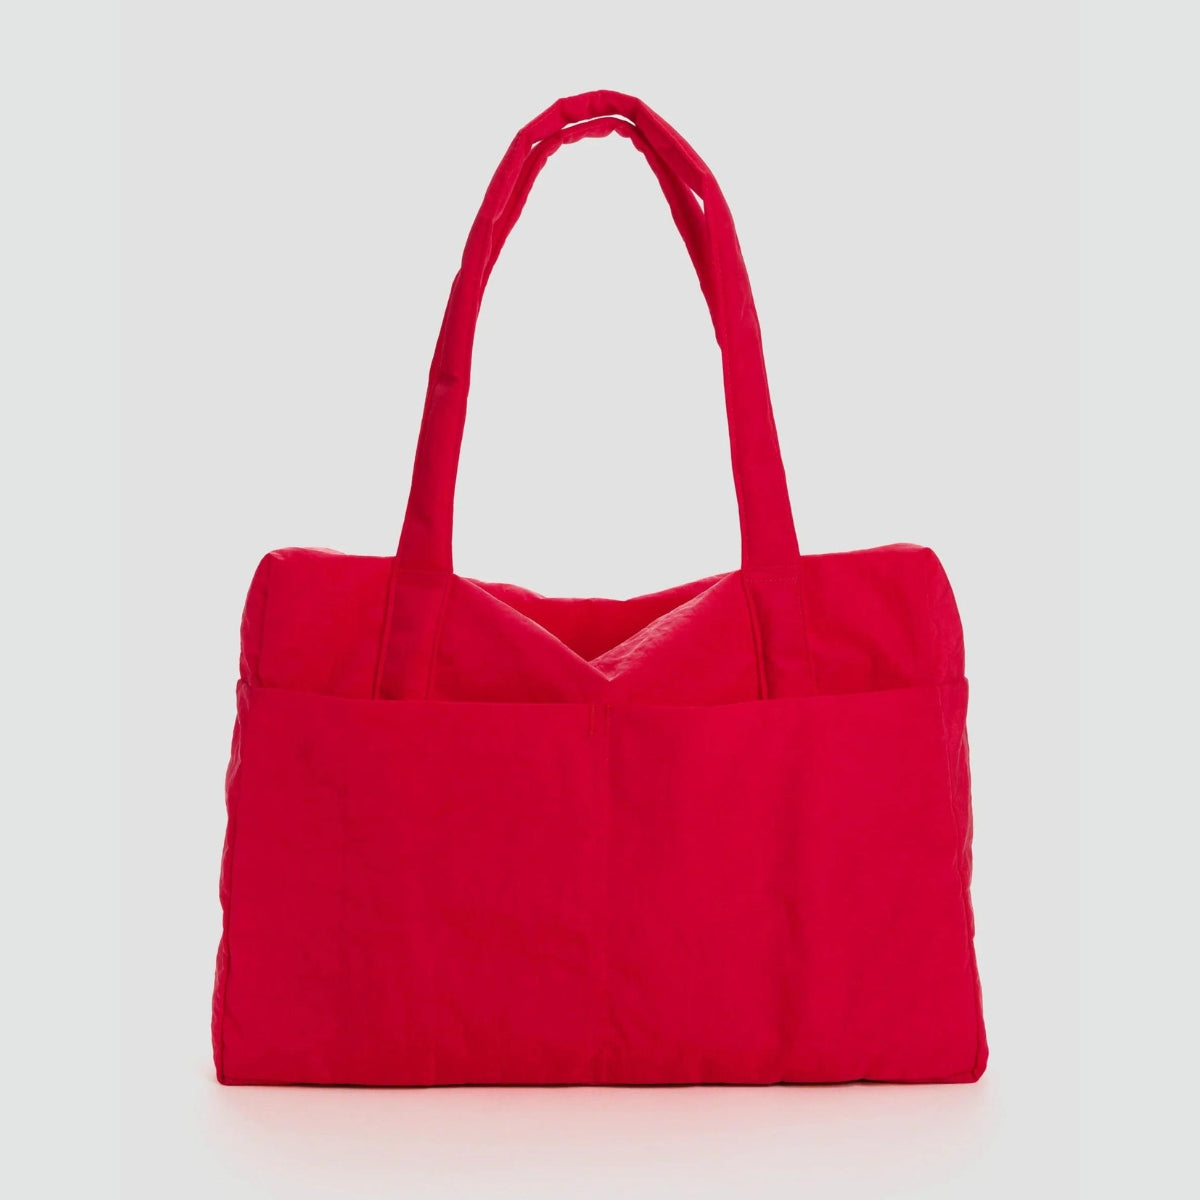 Baggu Cloud Carry-on in Candy Apple